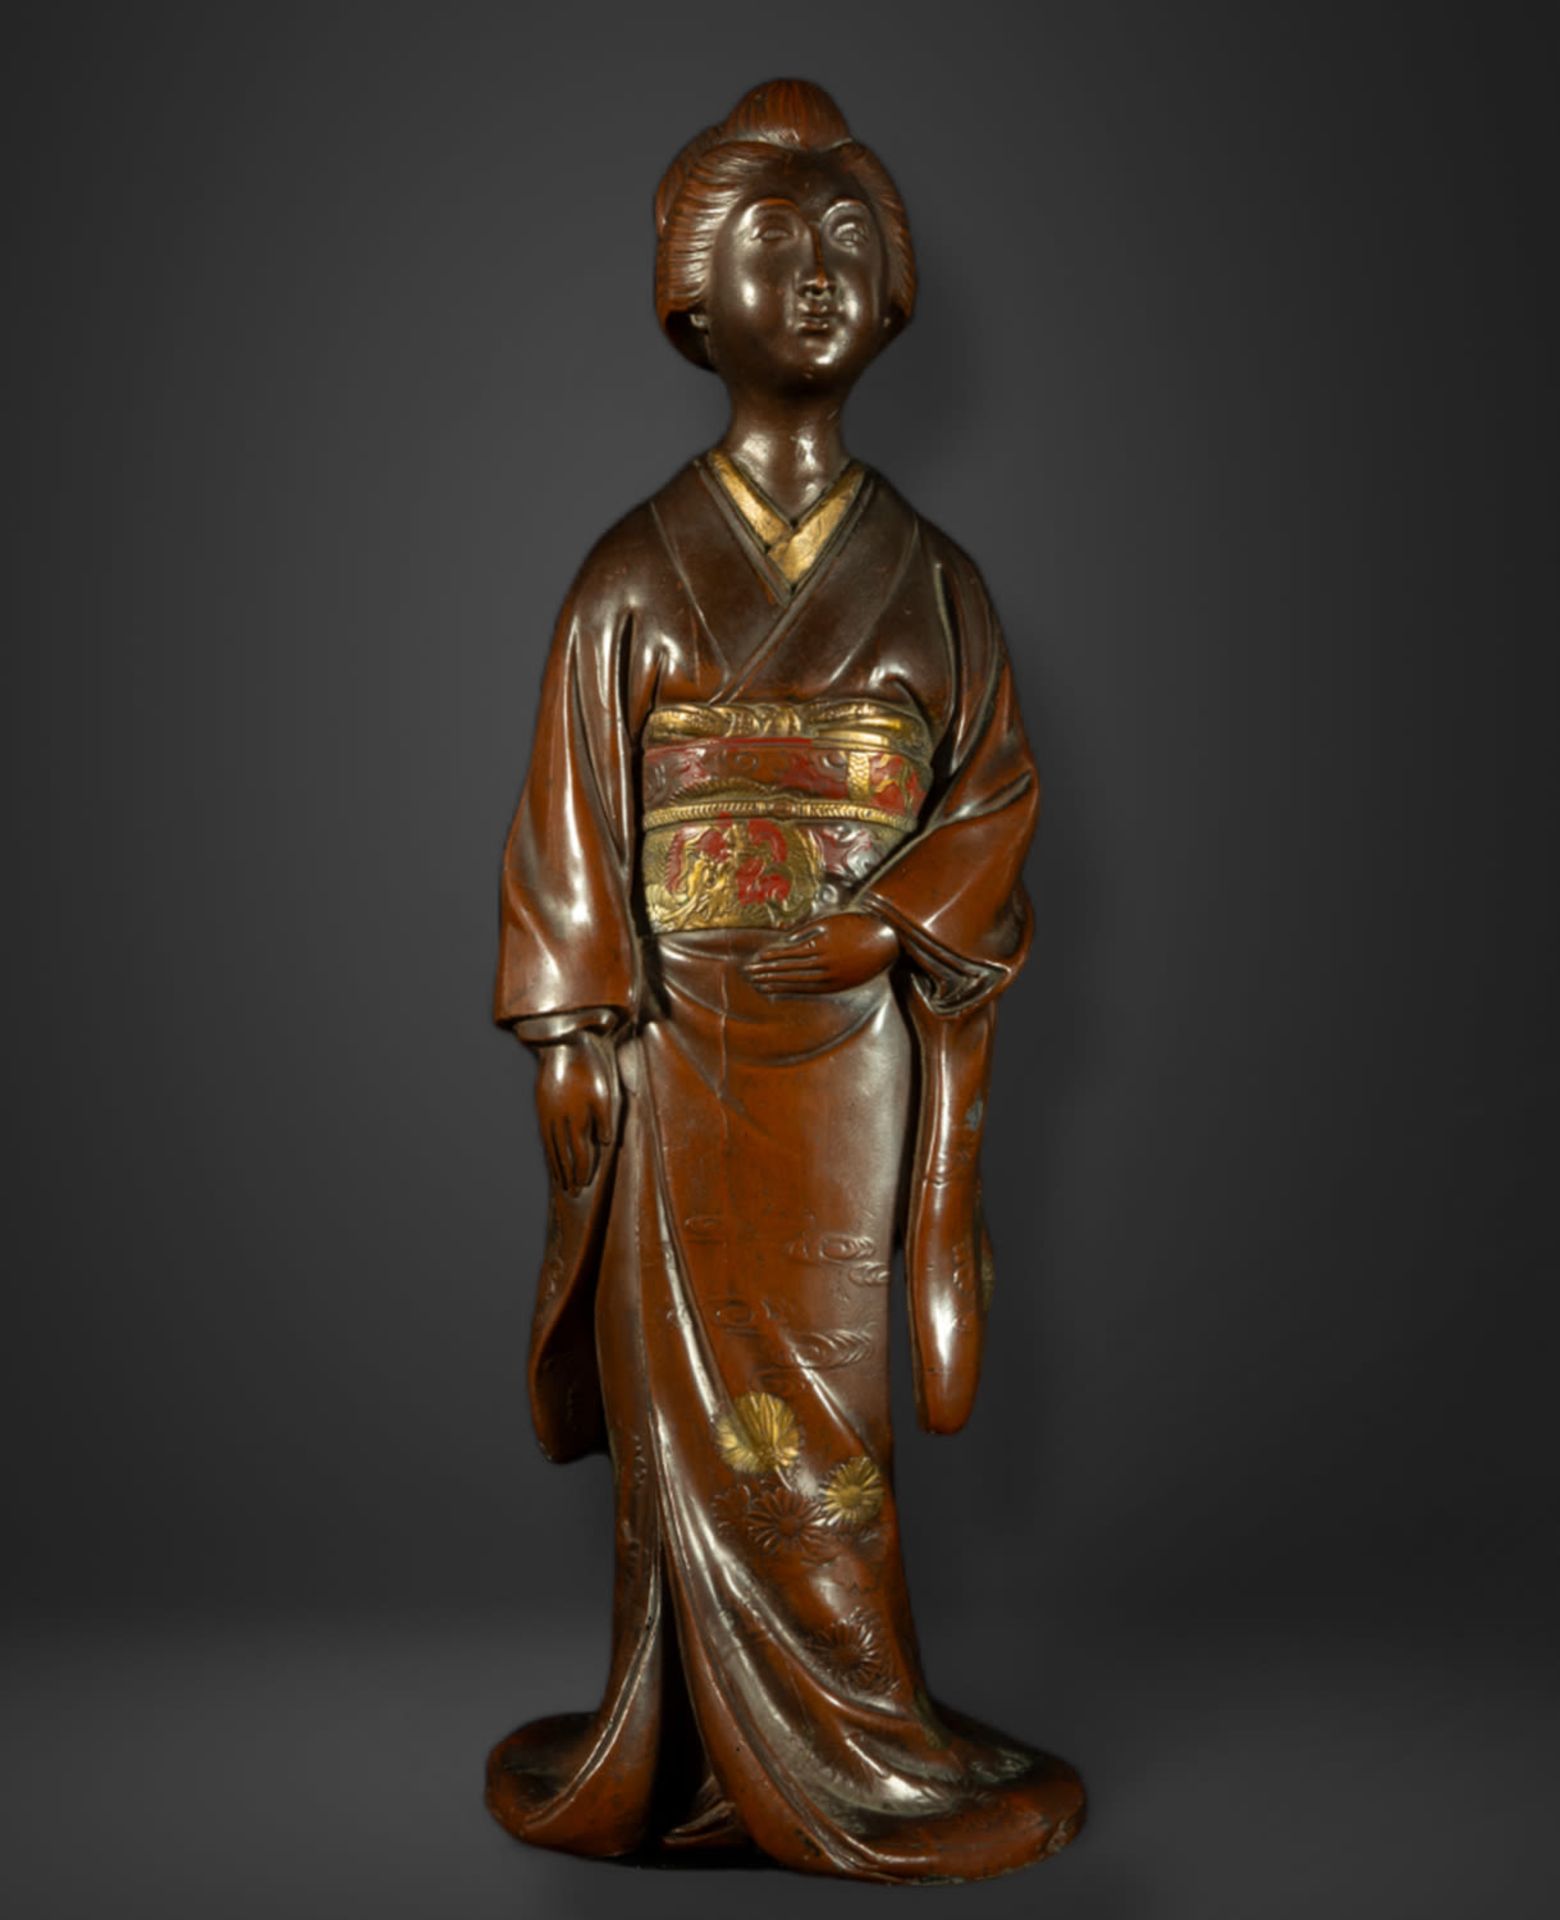 Exquisite Japanese Meiji Geisha in carved and gold-gilt "repoussé" copper, 19th century